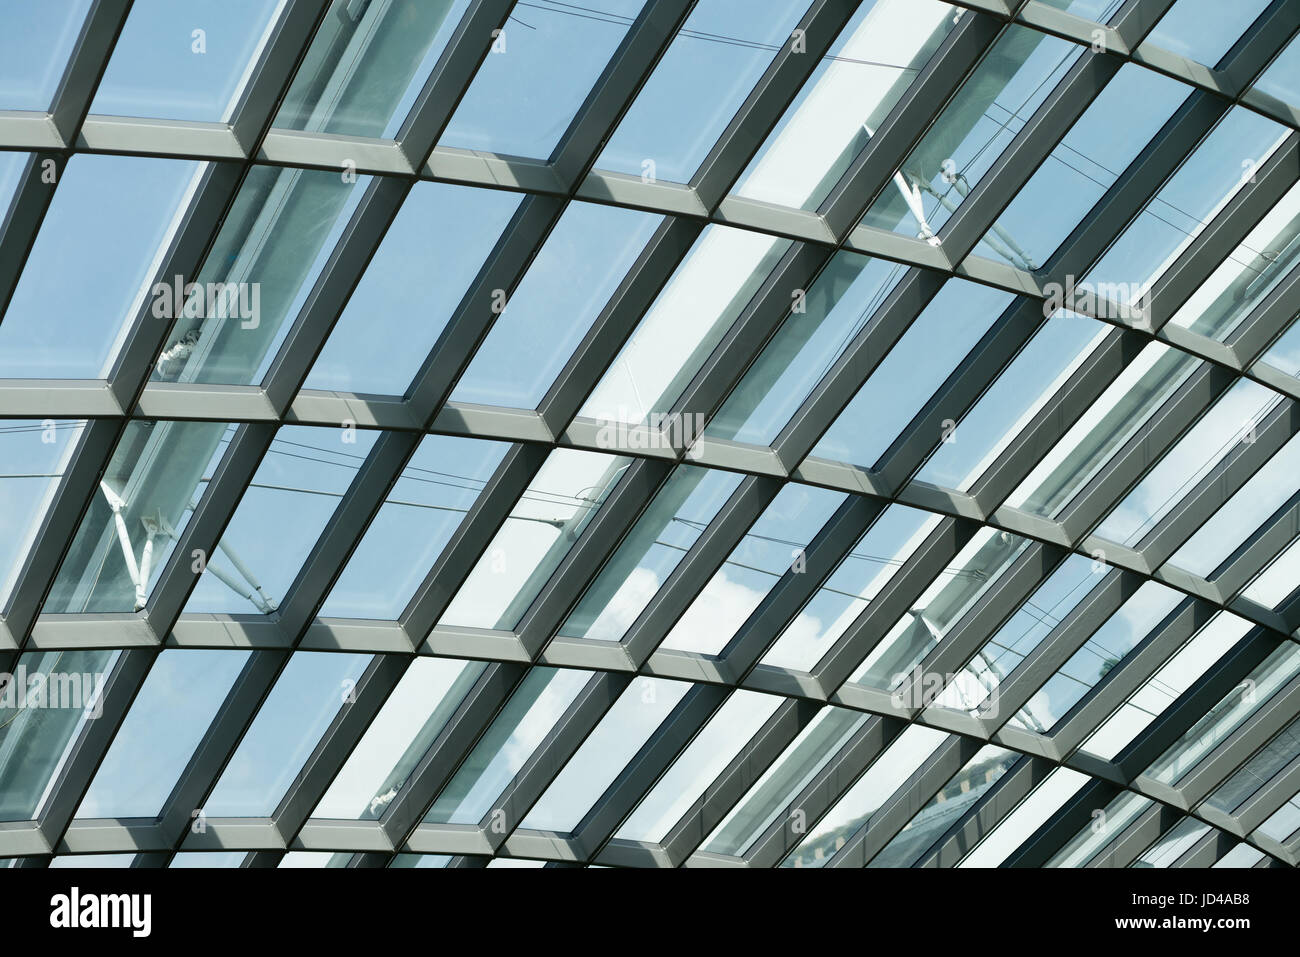 Skylight roof structure of glass and stee interlacedl Stock Photo